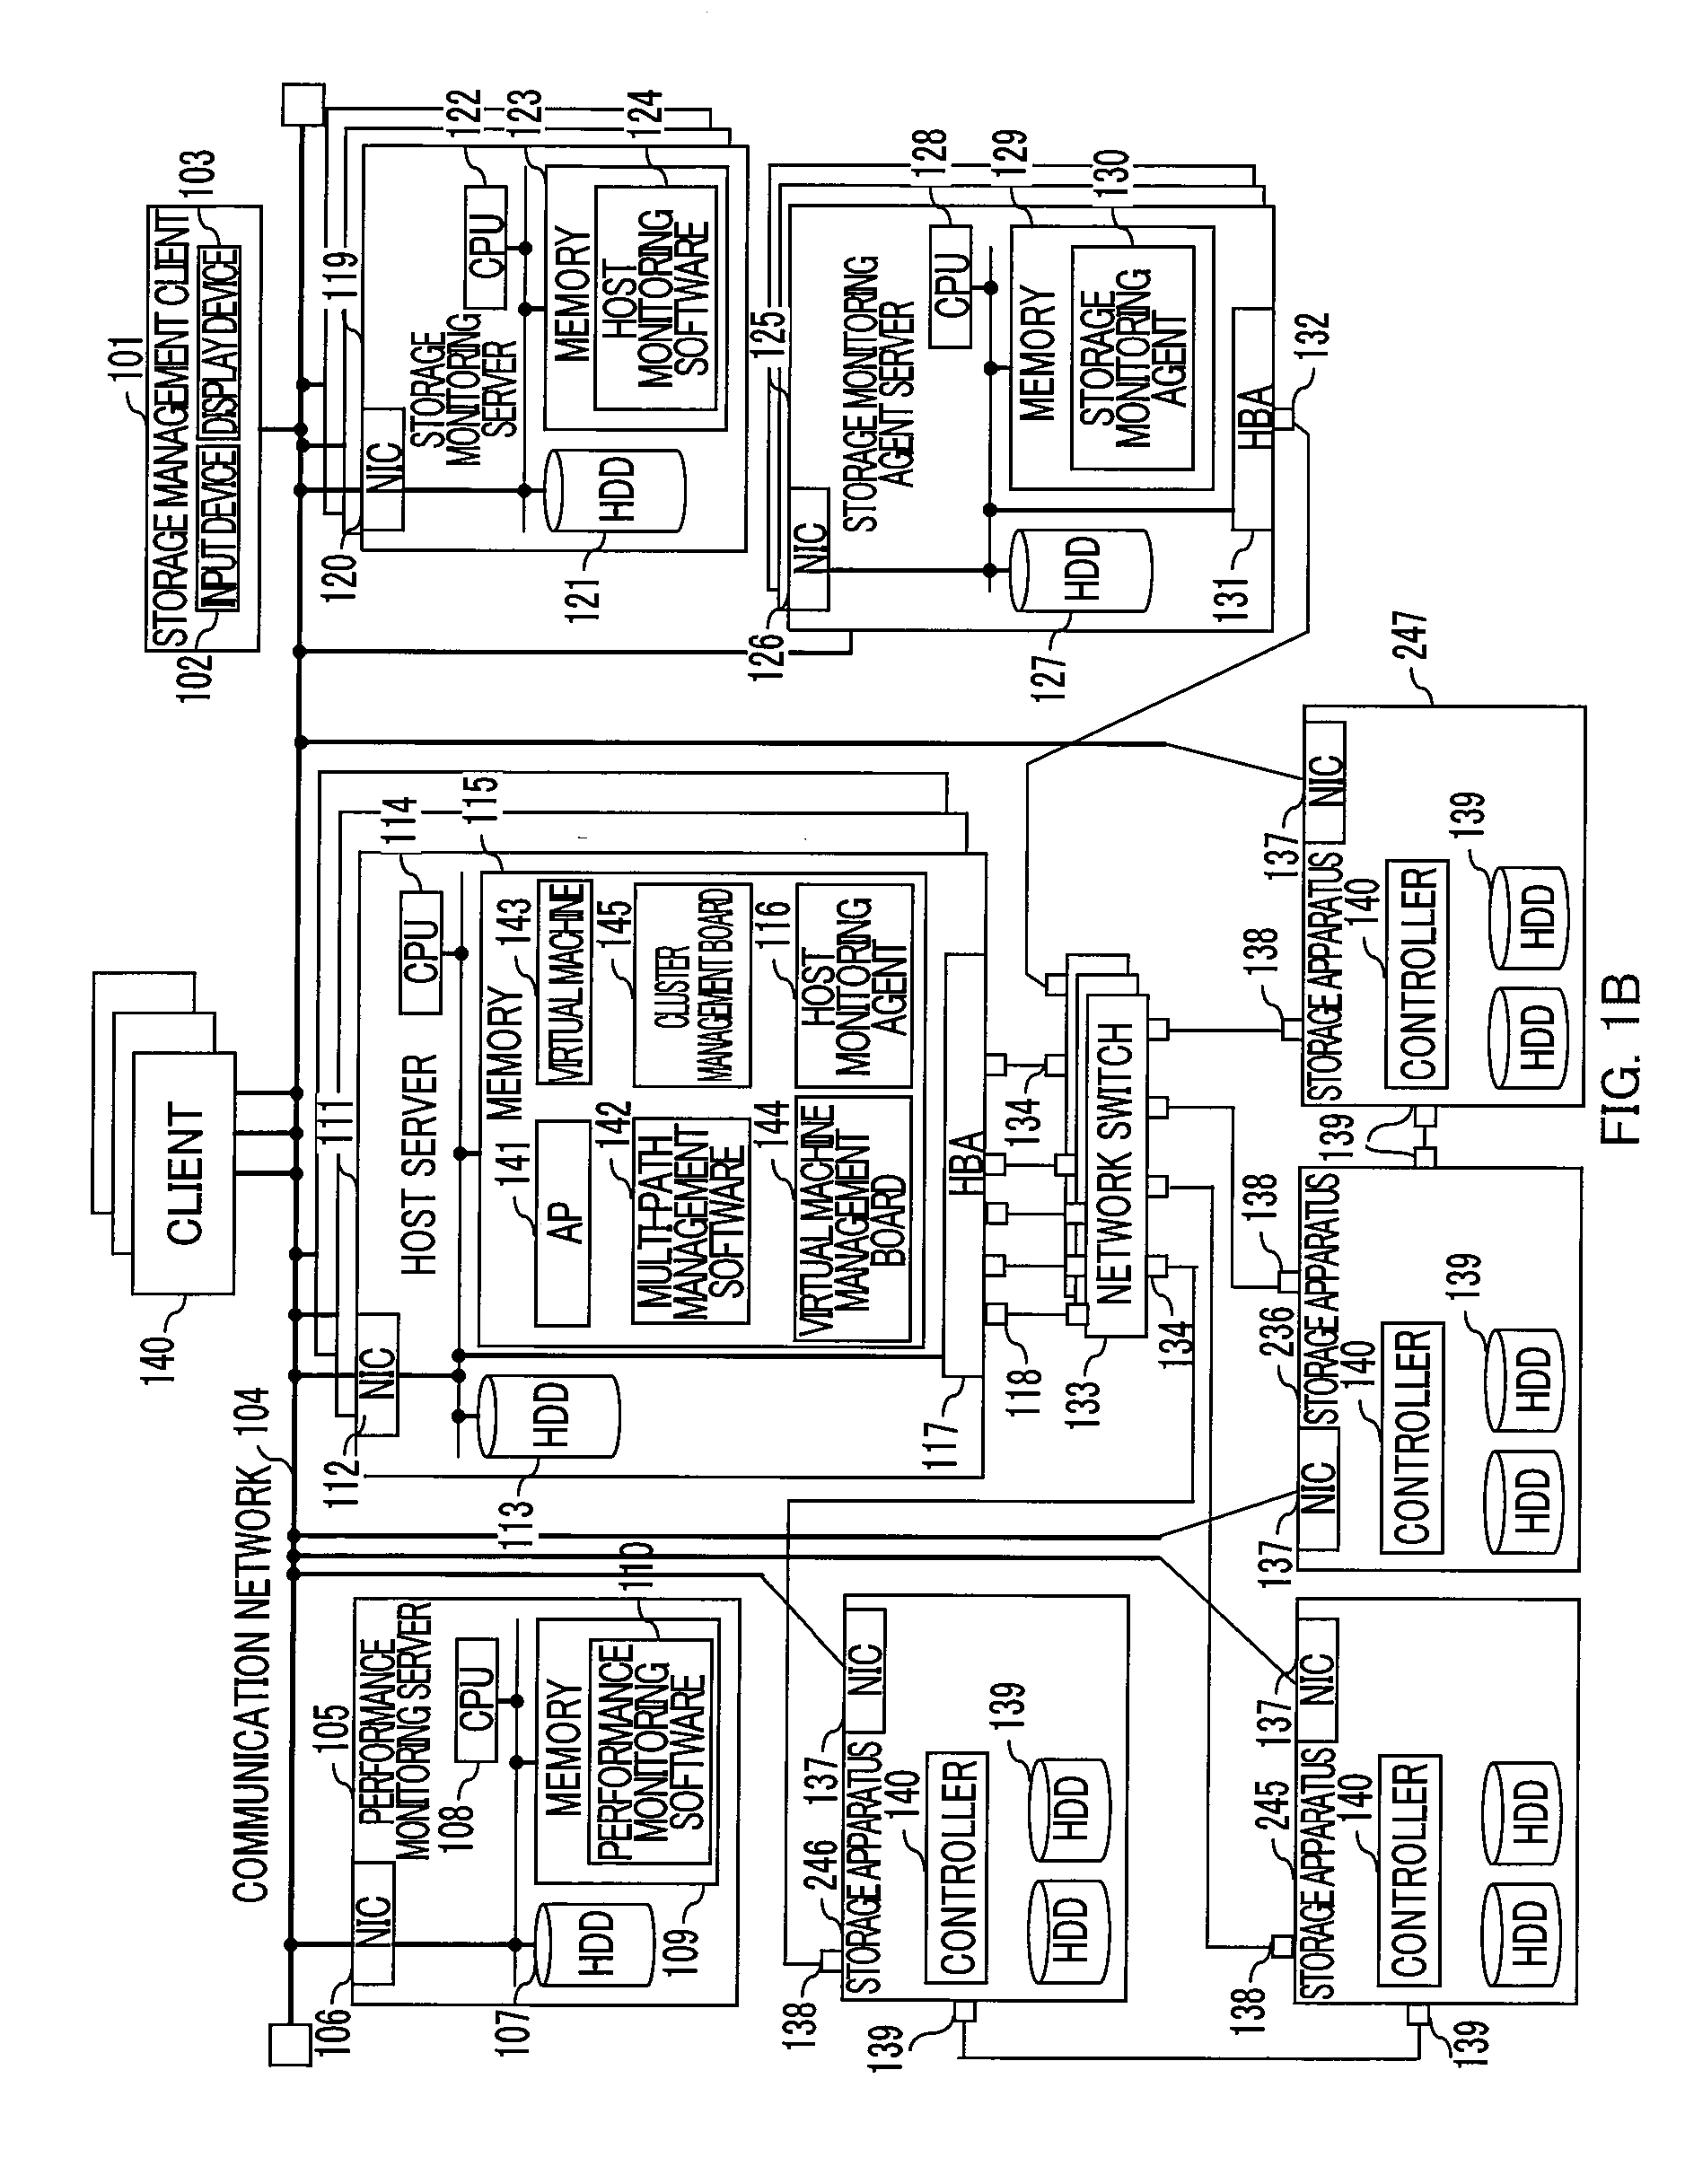 Information processing system, and management method for storage monitoring server